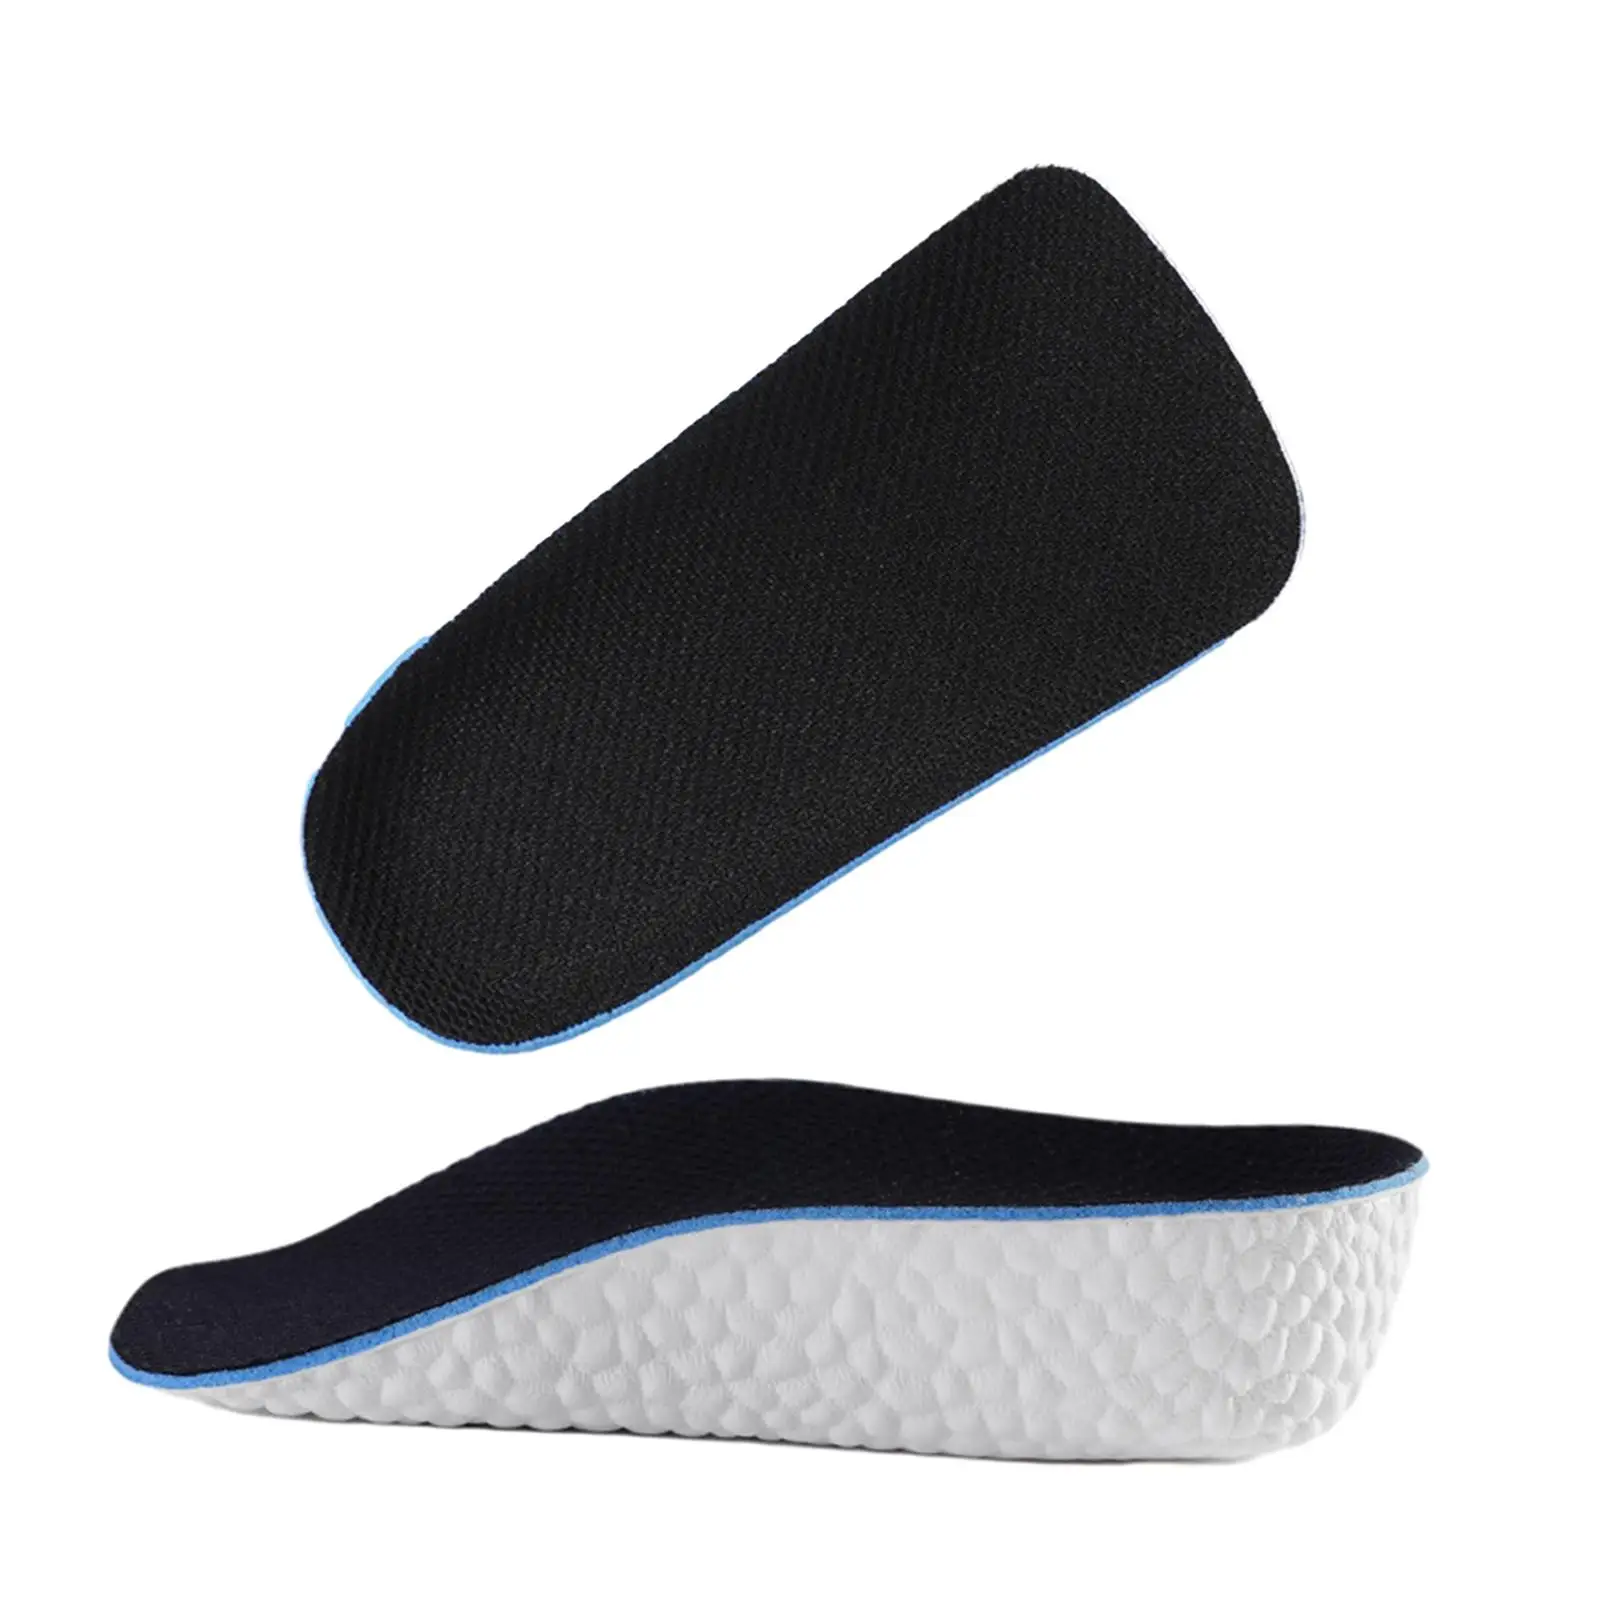 2Pcs Height Increase Insoles Absorb Sweat Anti Slip EVA Shock Absorption Arch Support Insert Cushion for Boots High Heels Hiking